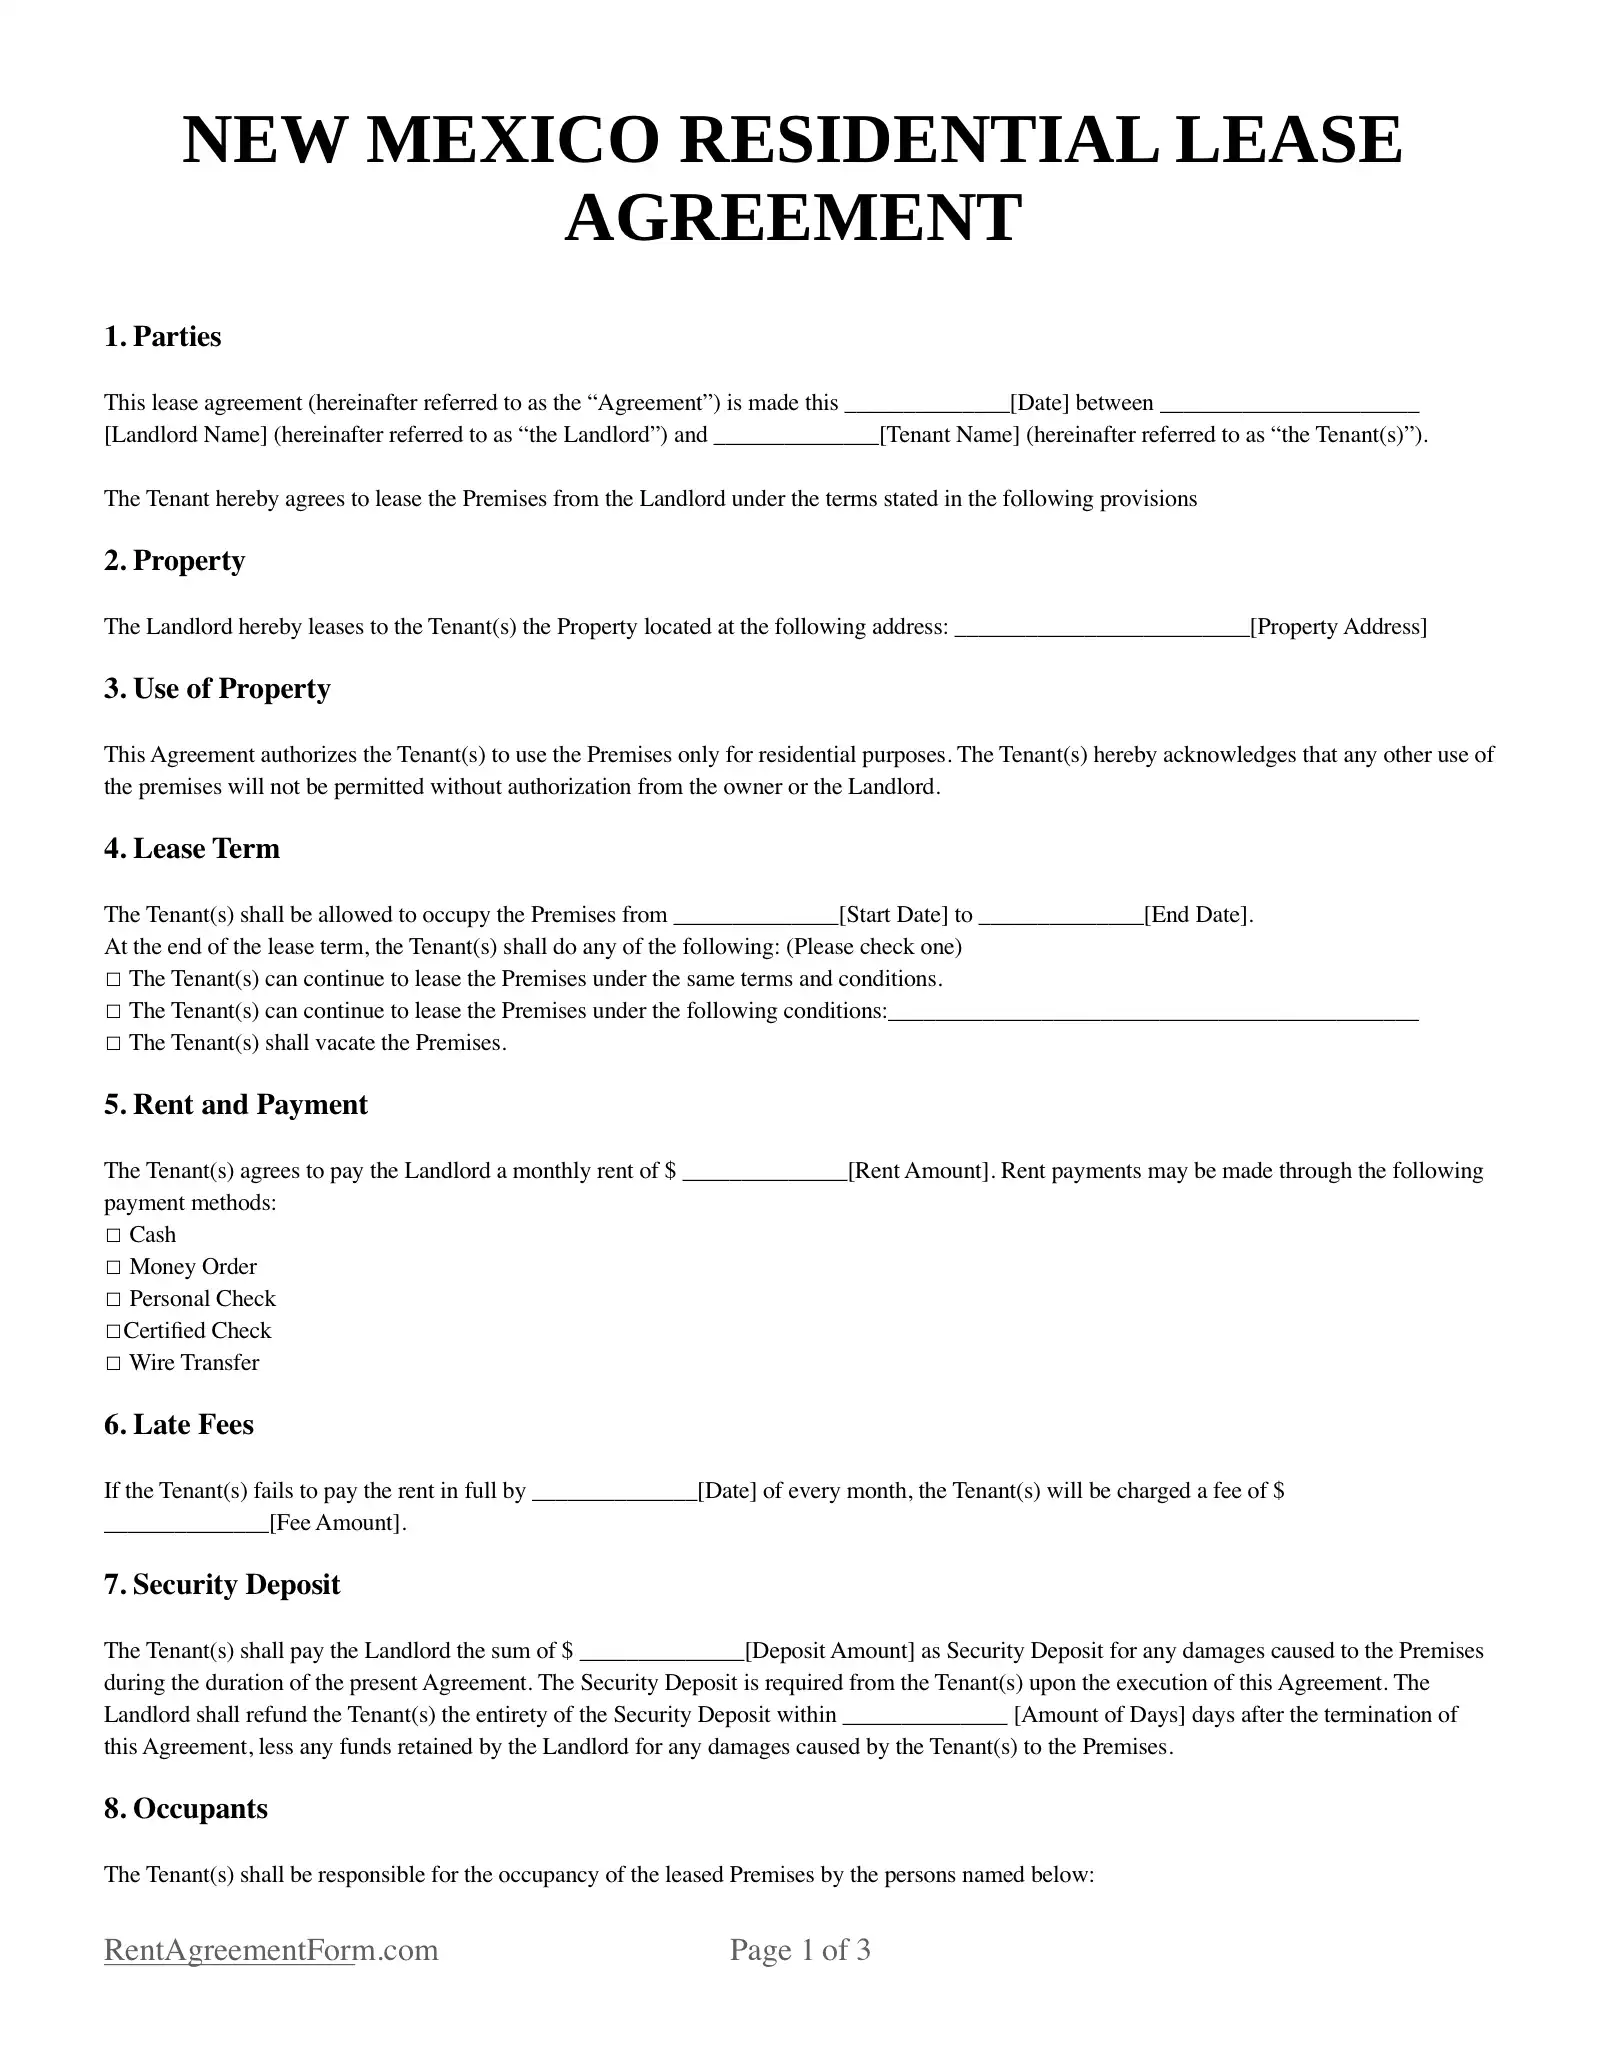 New Mexico Residential Lease Agreement Sample